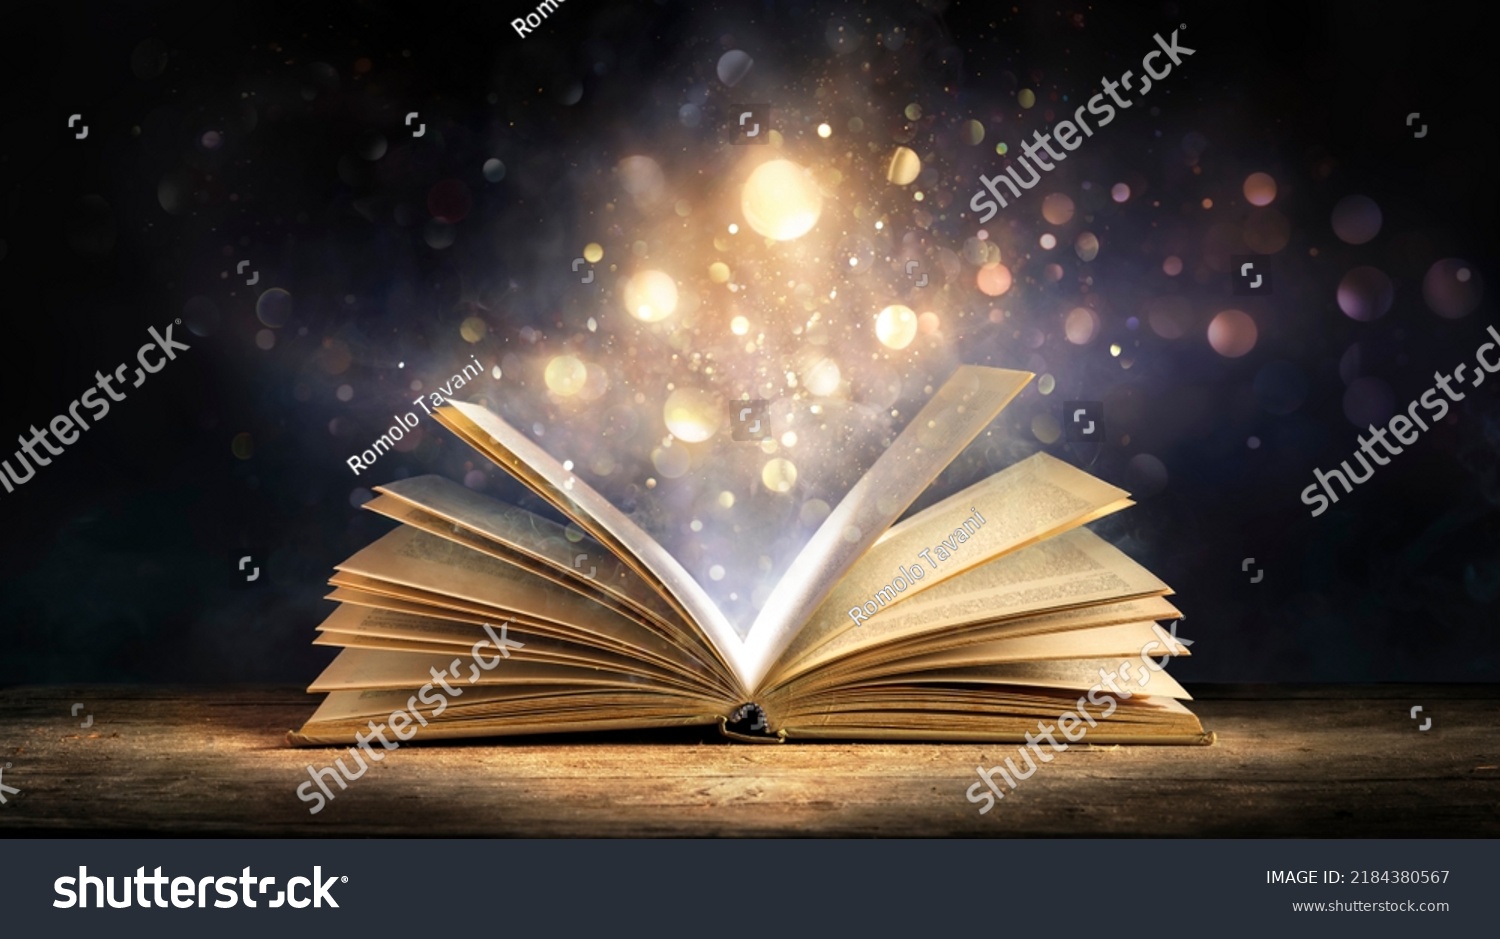 Magic Book With Open Antique Pages And Abstract Bokeh Lights Glowing In Dark Background - Literature And Education Concept #2184380567